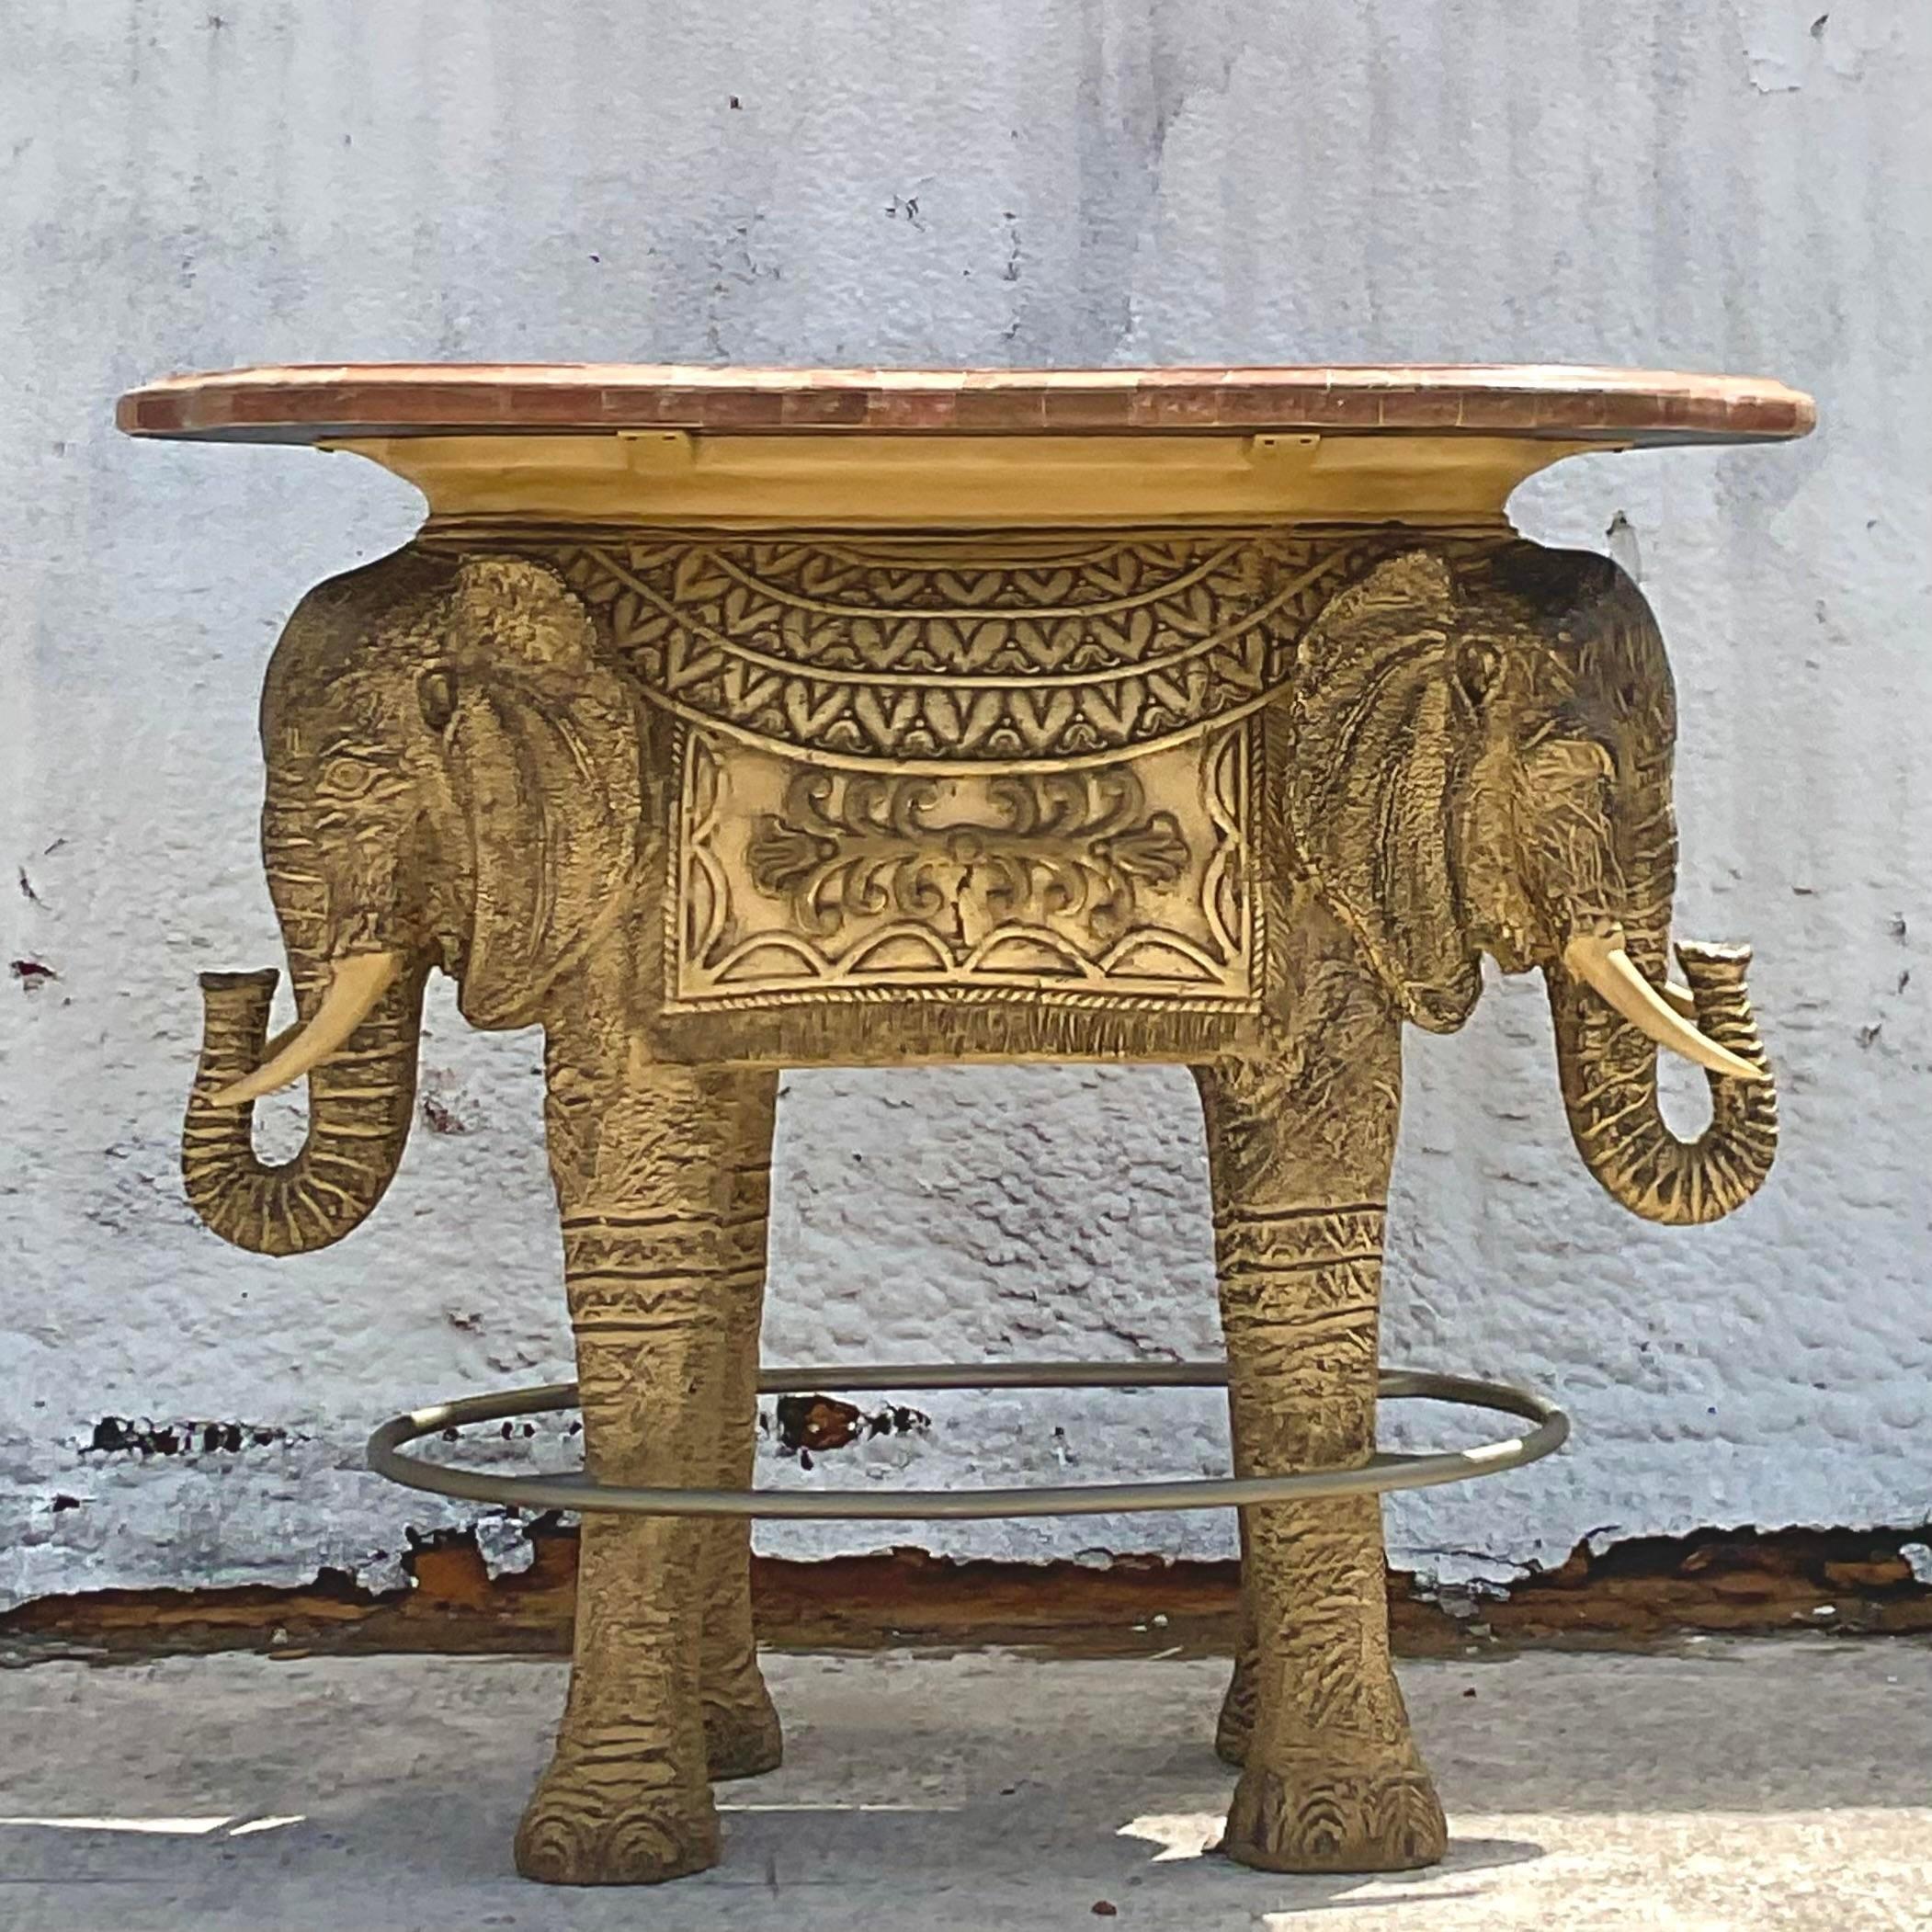 A fabulous vintage Coastal dry bar. A chic double elephant base with a tessellated stone top. A 360 running rail makes this perfect from all sides. Can be the perfect dry bar or tall dining table. You decide! Acquired from a Palm Beach estate.